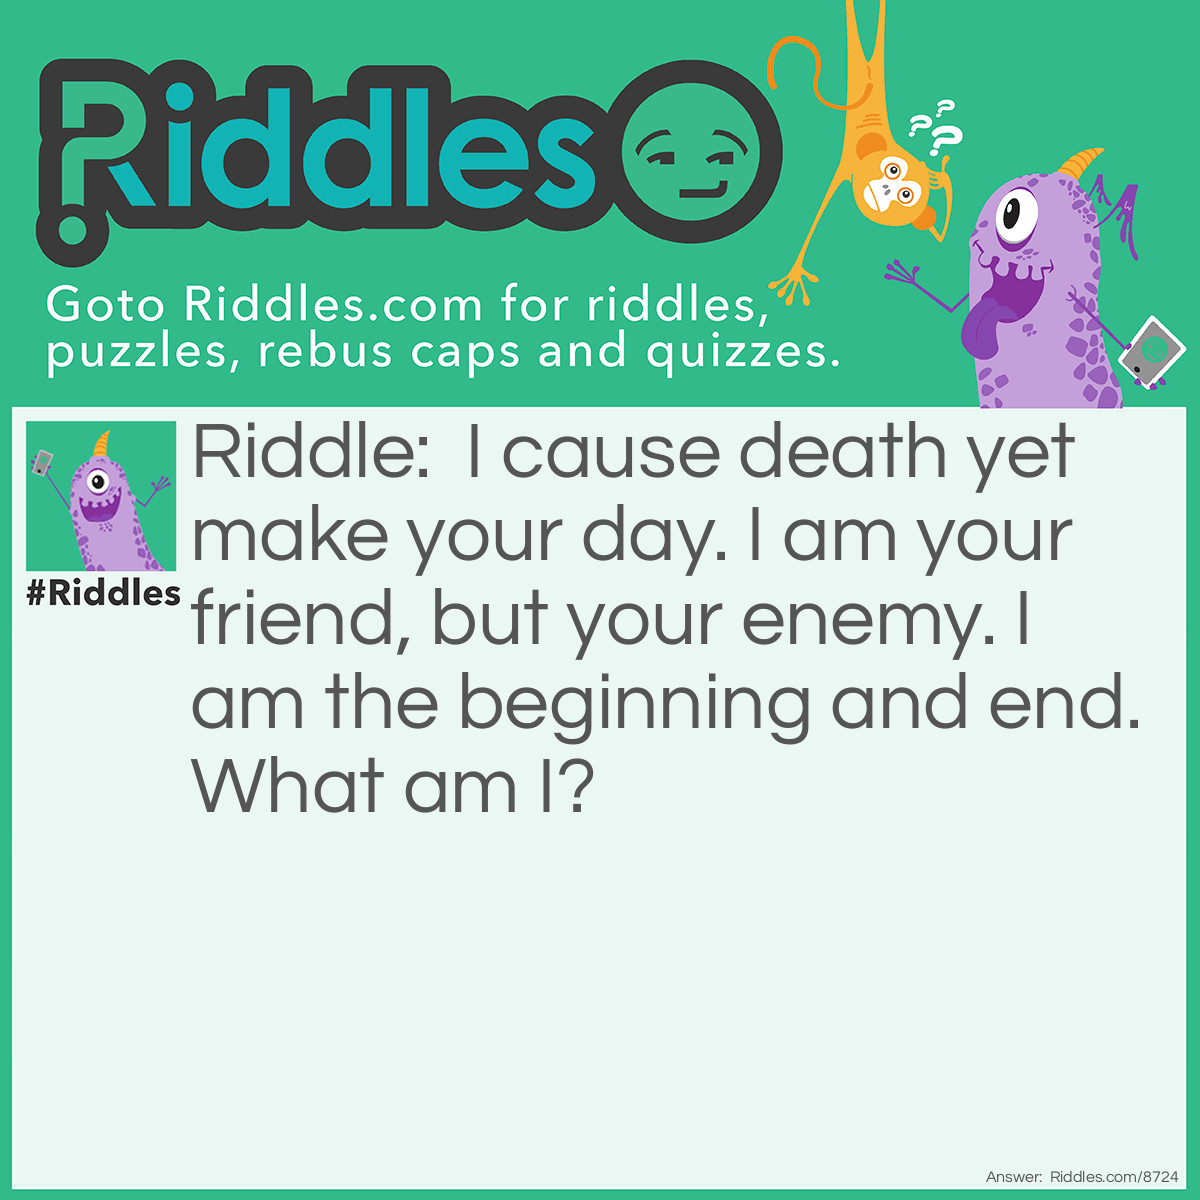 Riddle: I cause death yet make your day. I am your friend, but your enemy. I am the beginning and end. What am I? Answer: Time.